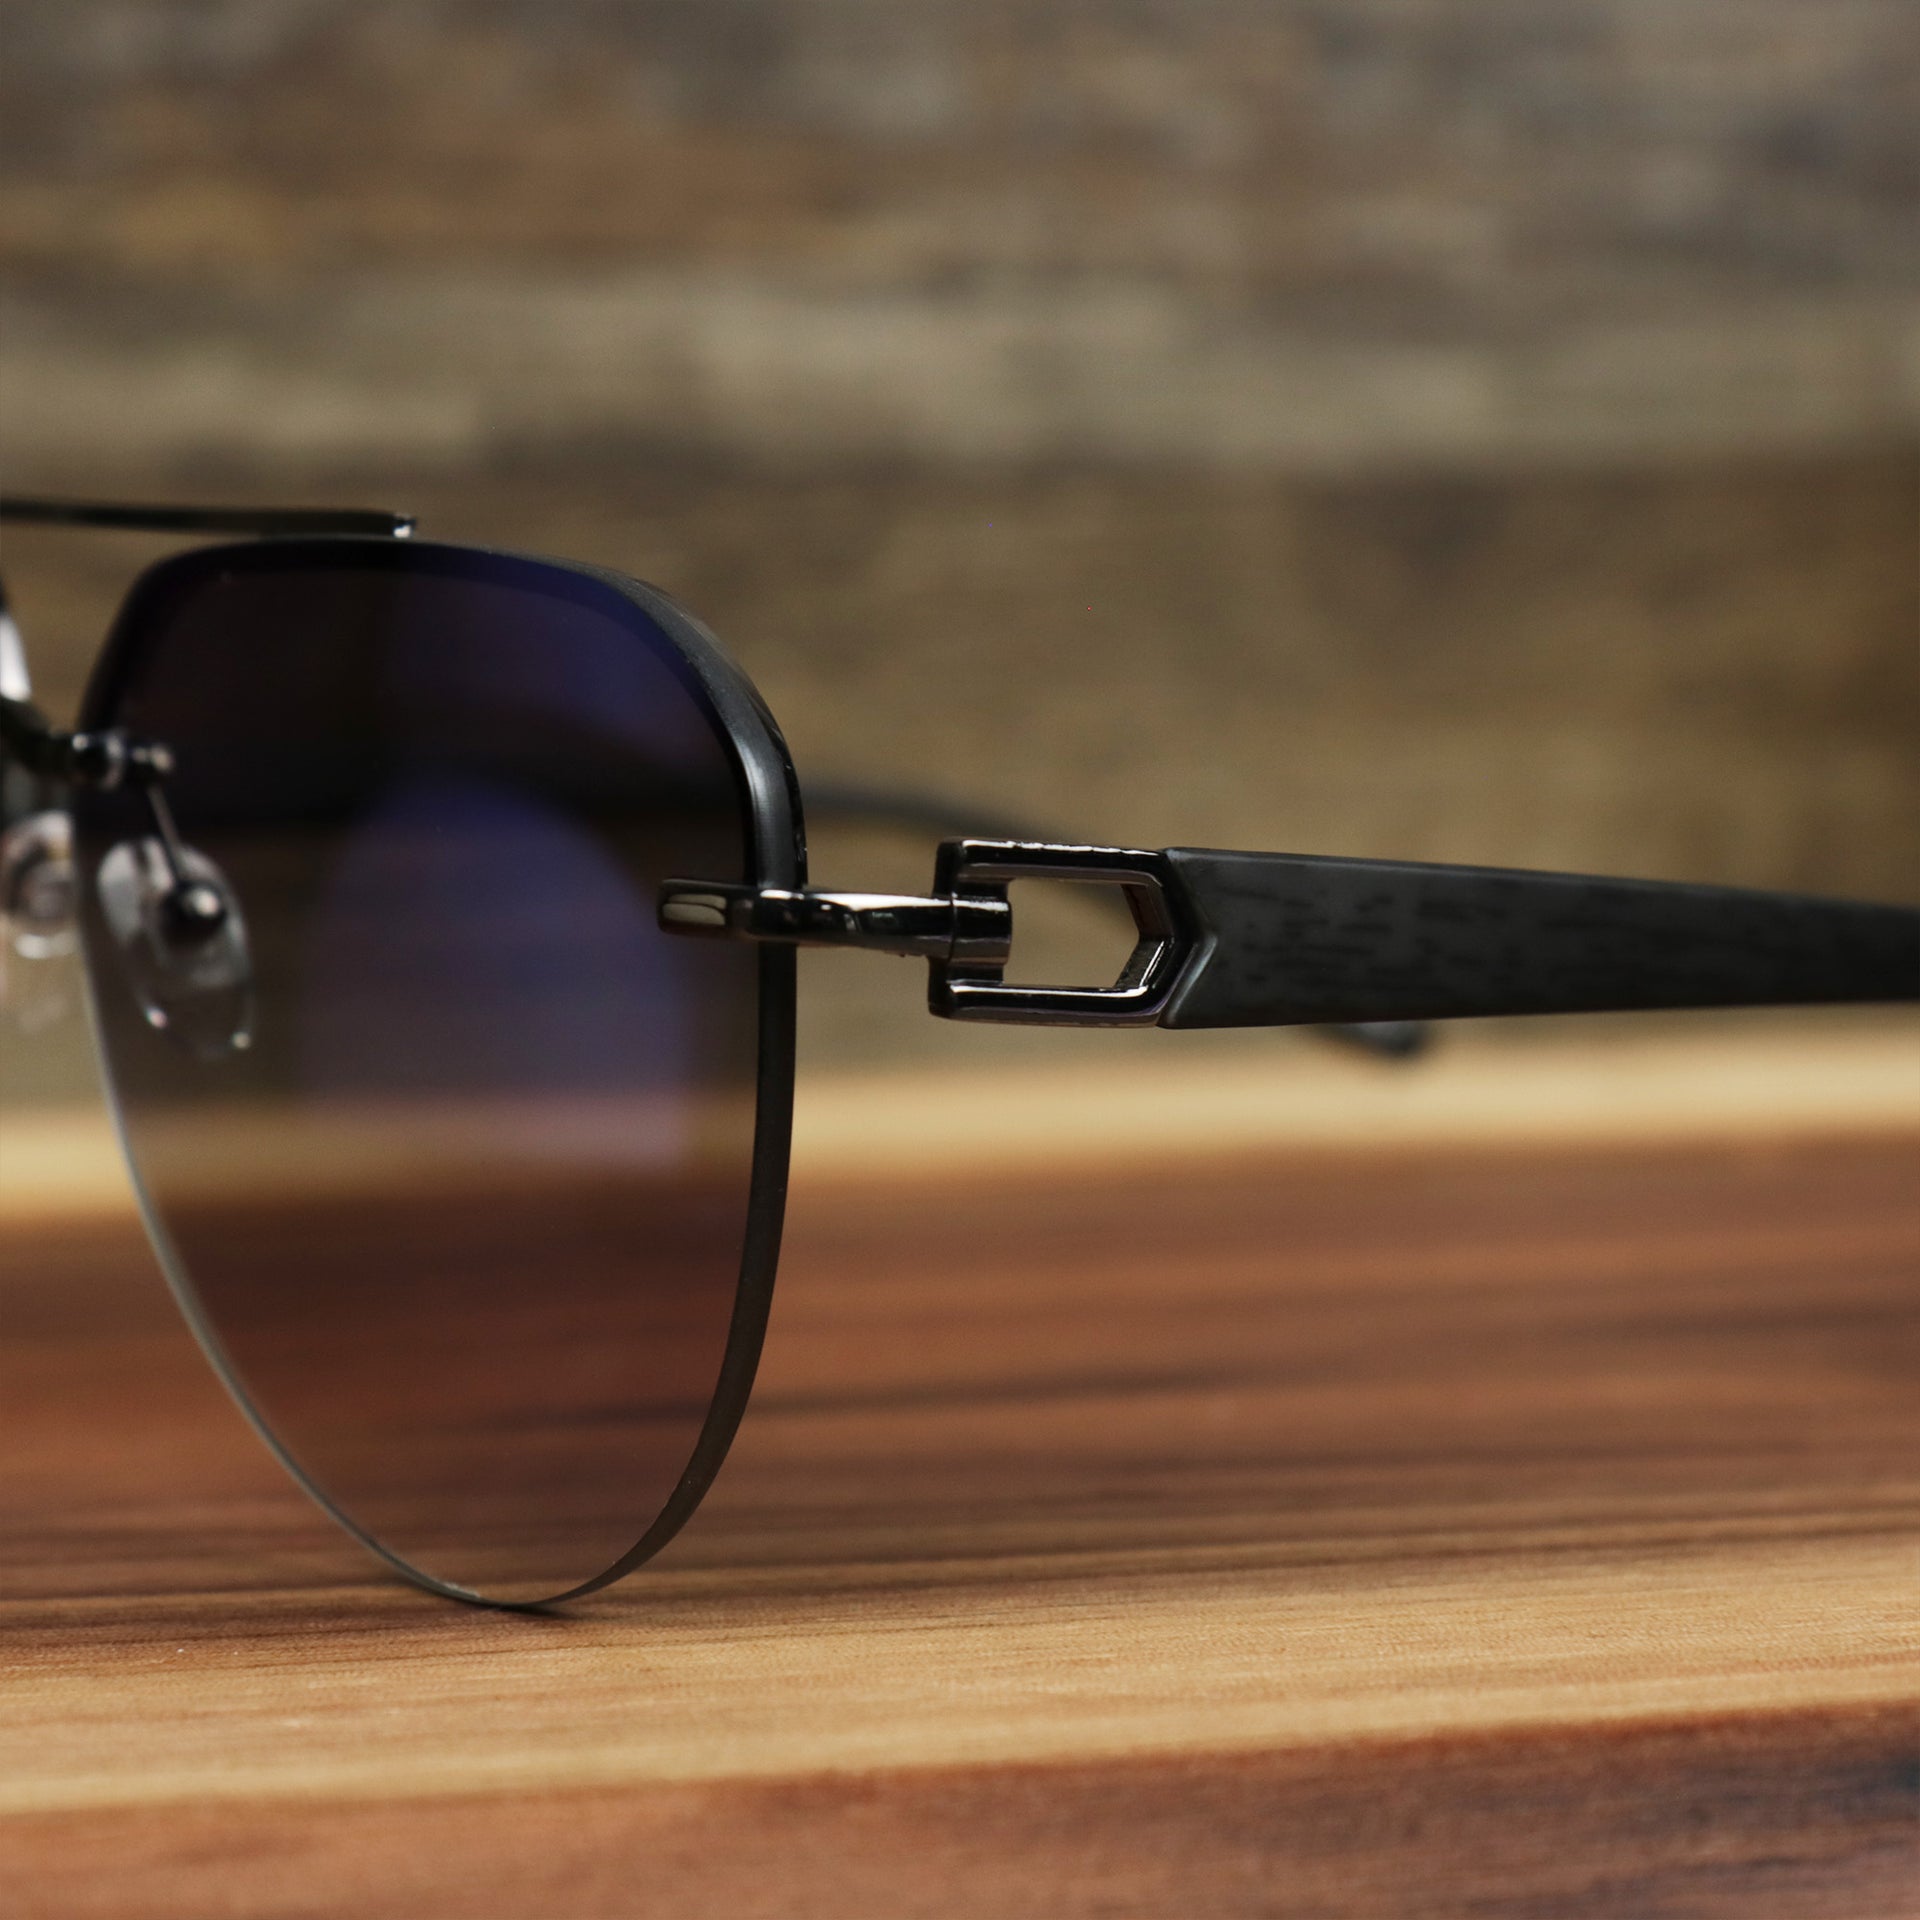 The hinge on the Round Aviator Frames Black Lens Sunglasses with Gold Frame